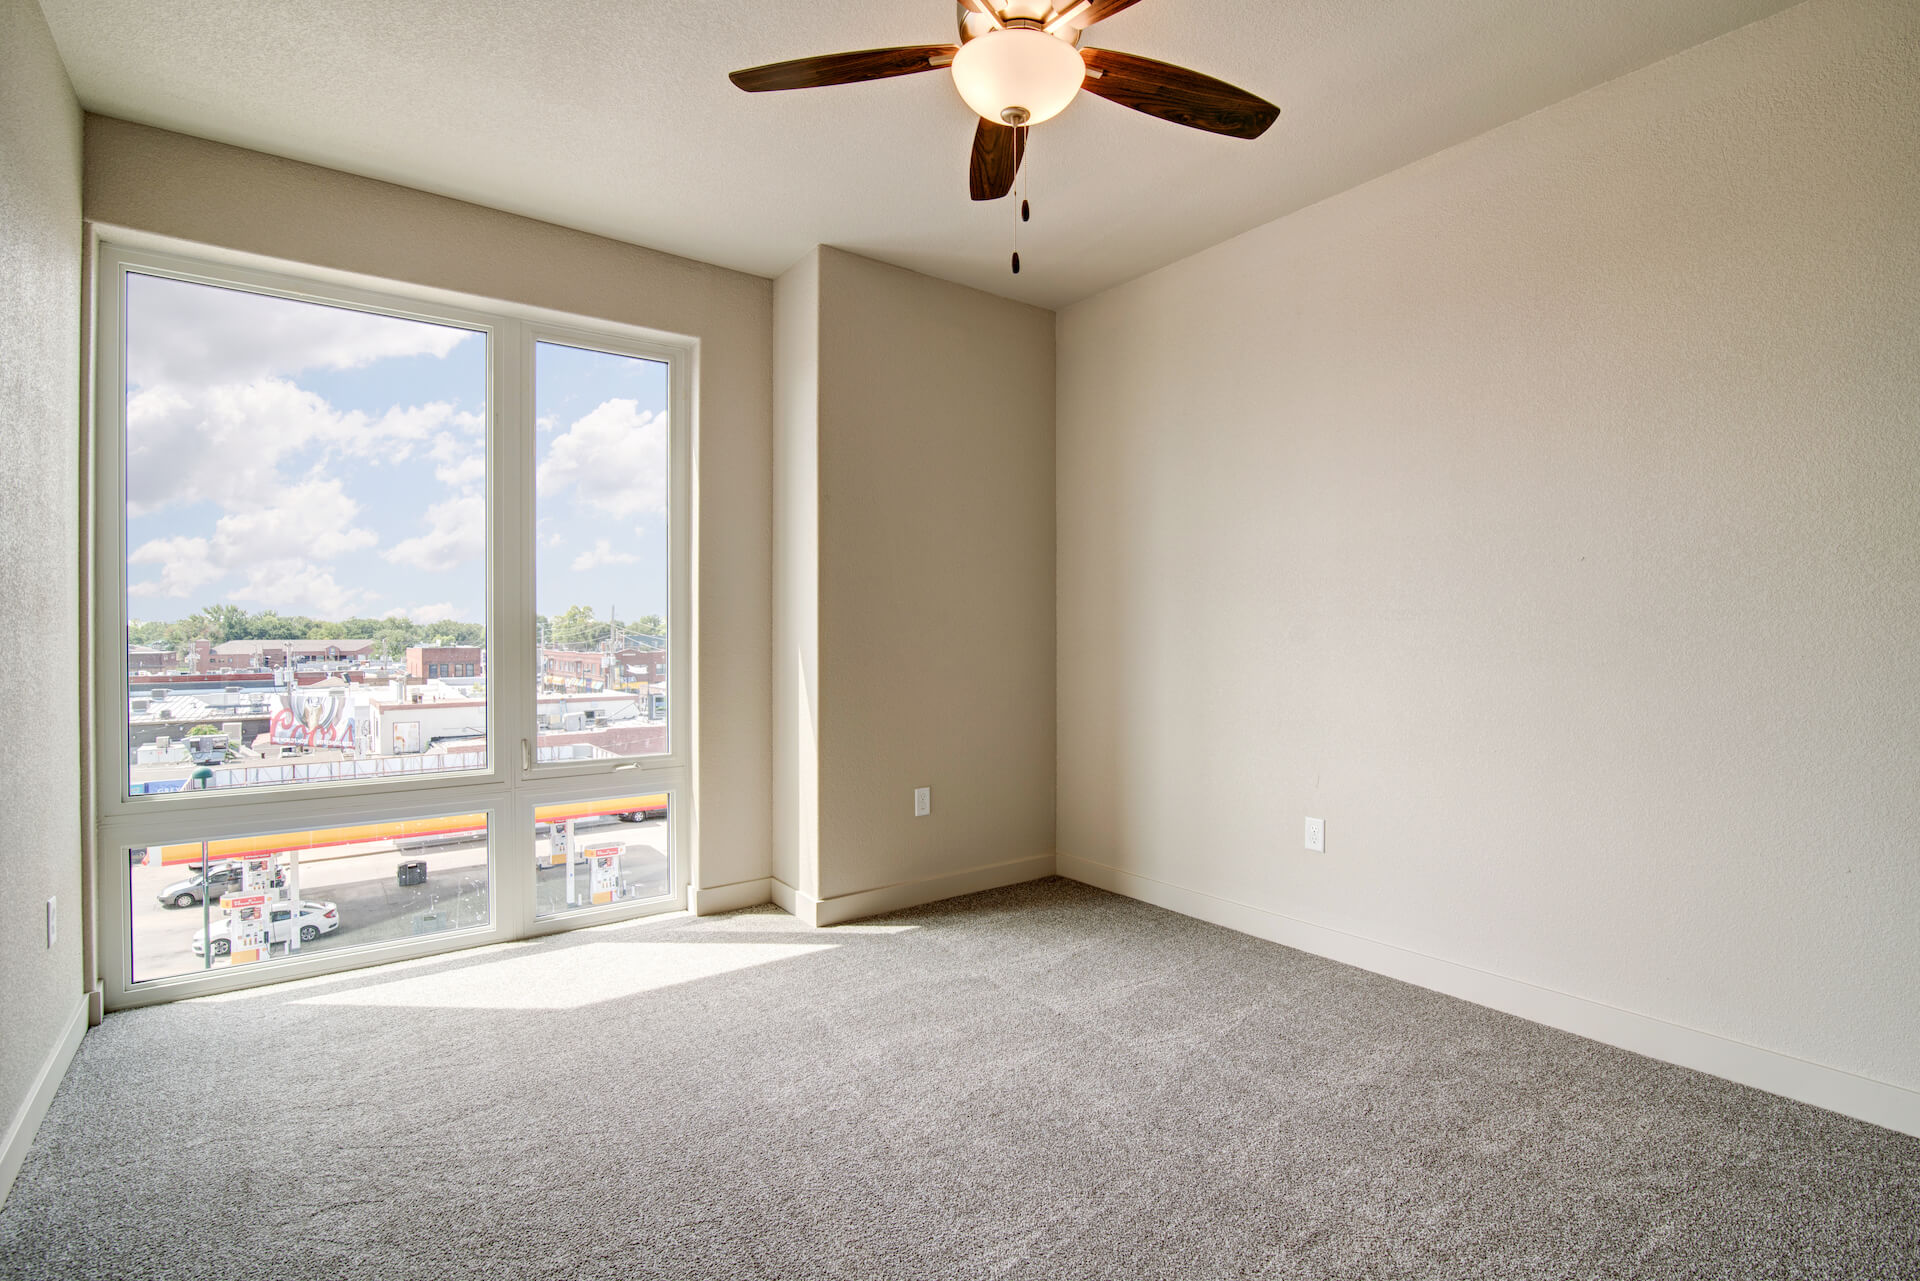 interior of an empty apartment at 12b lofts with a ceiling fan